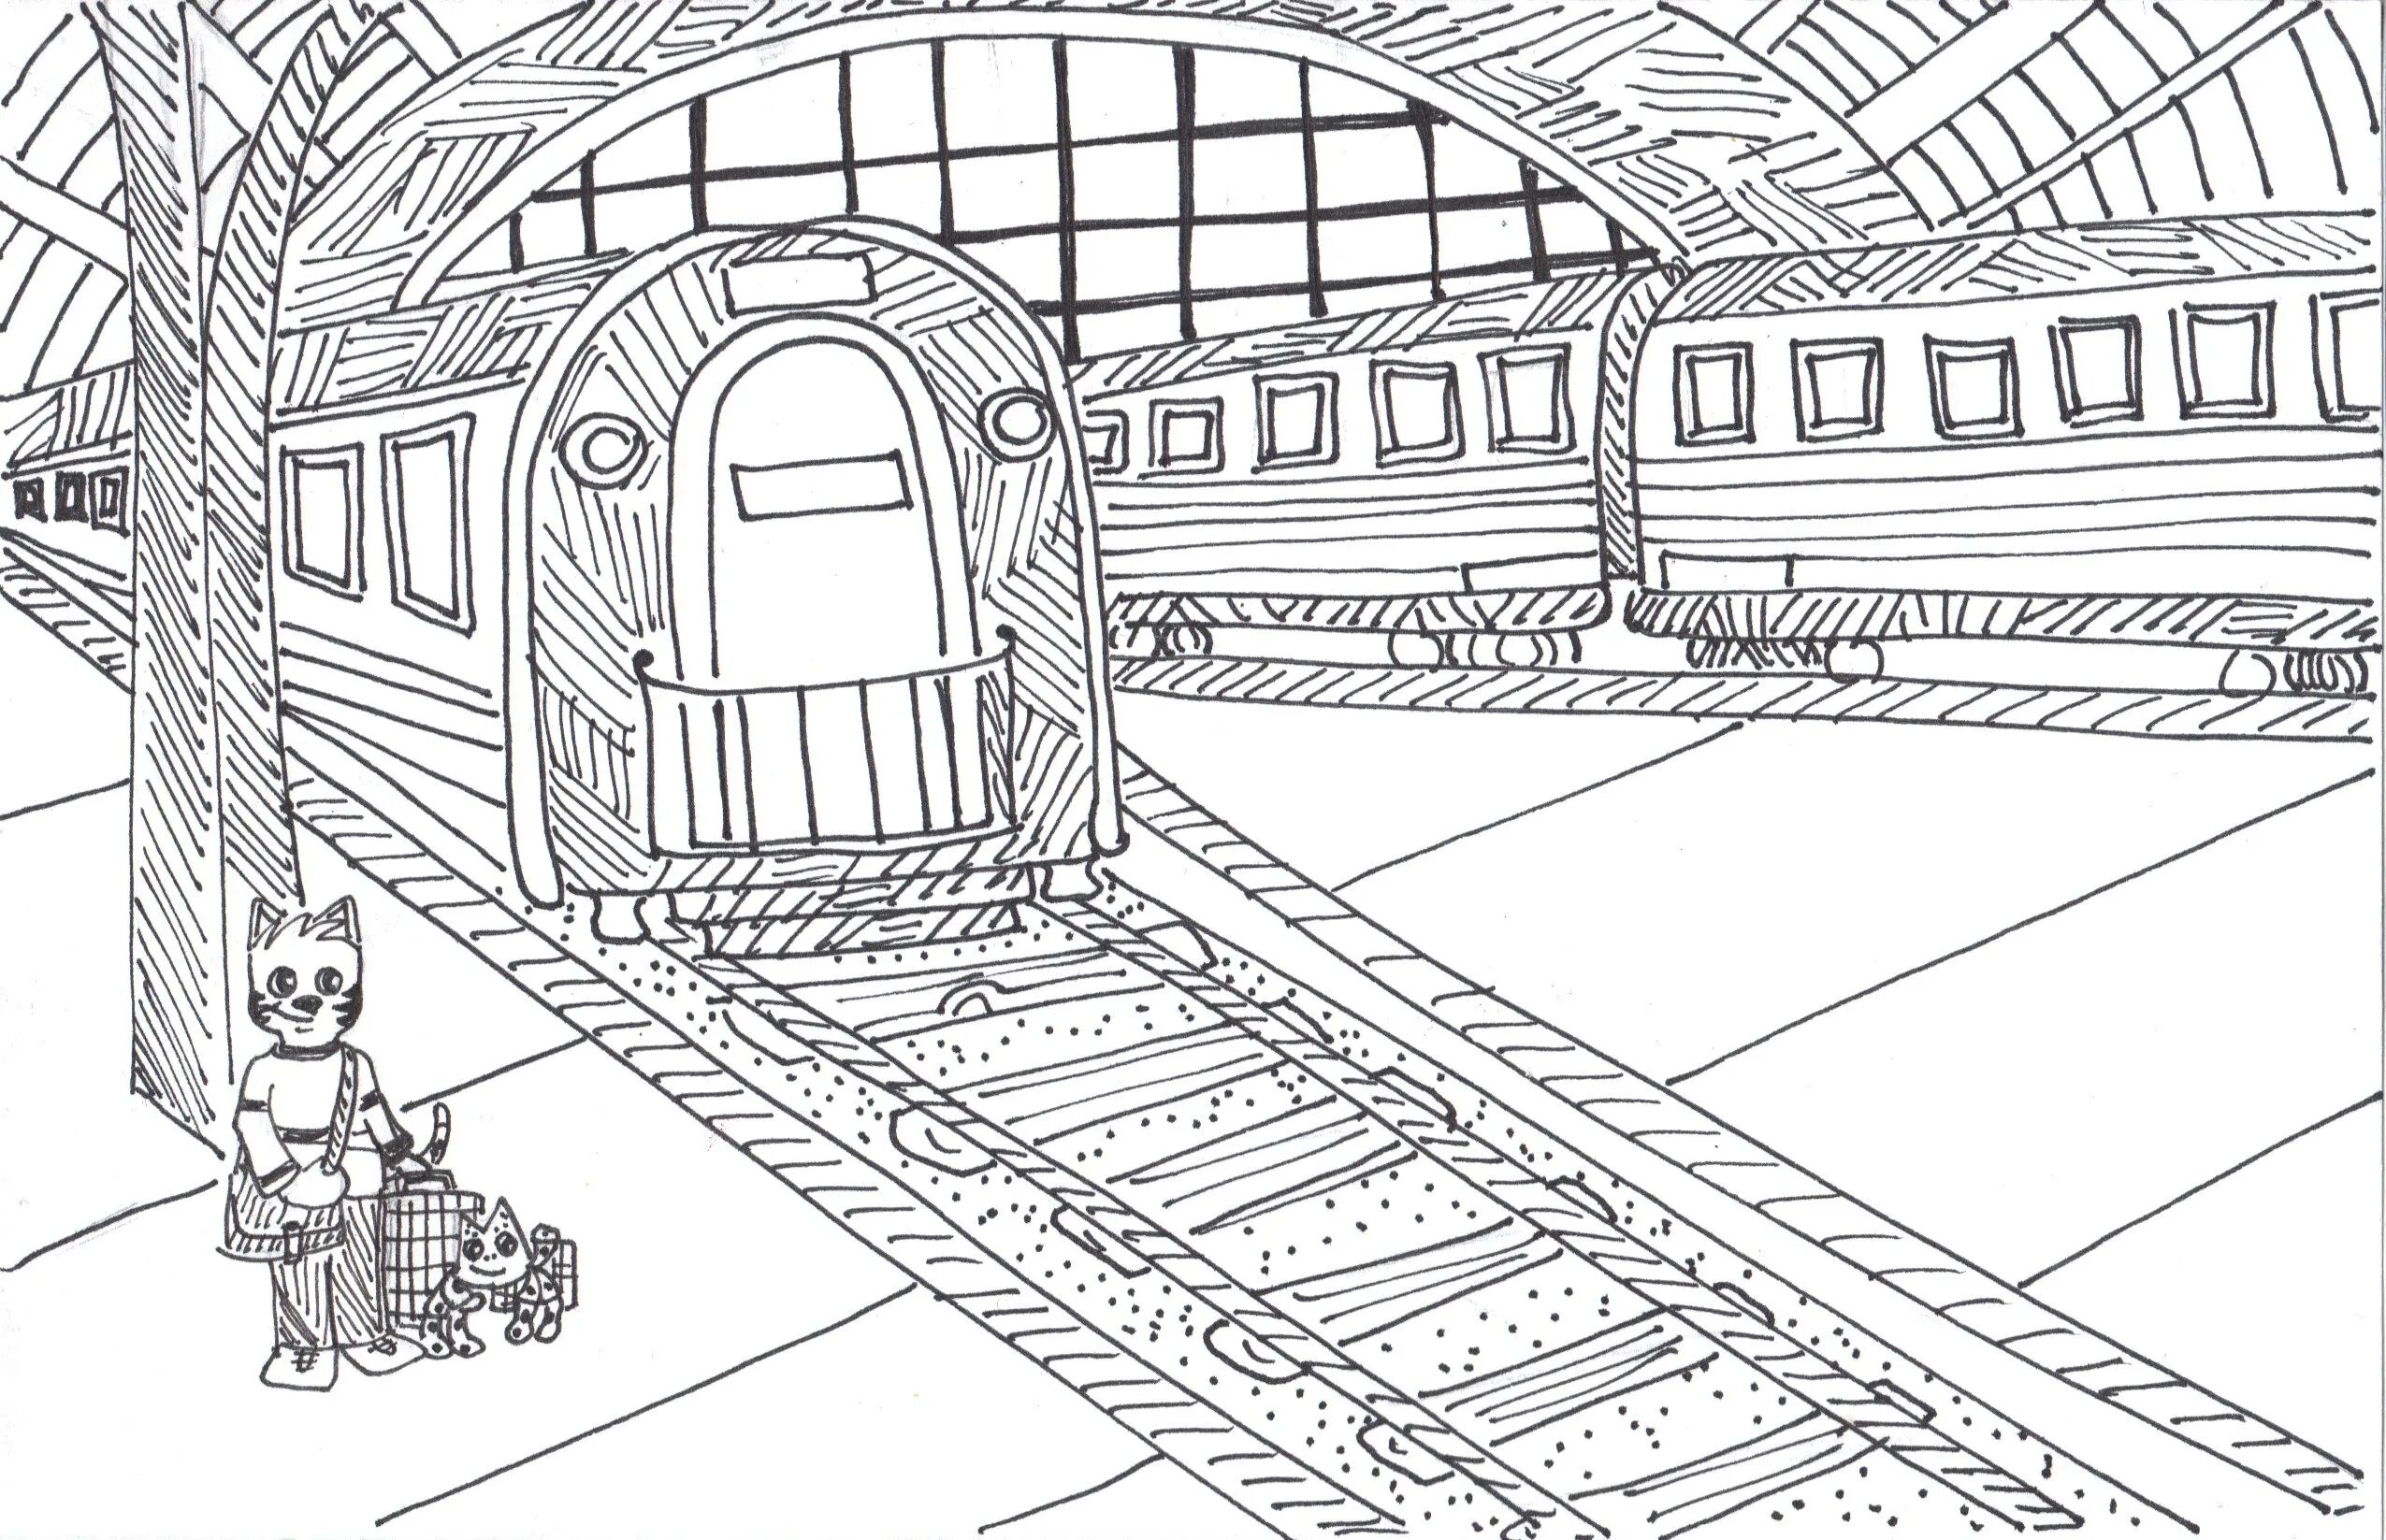 Nice train station coloring pages for kids